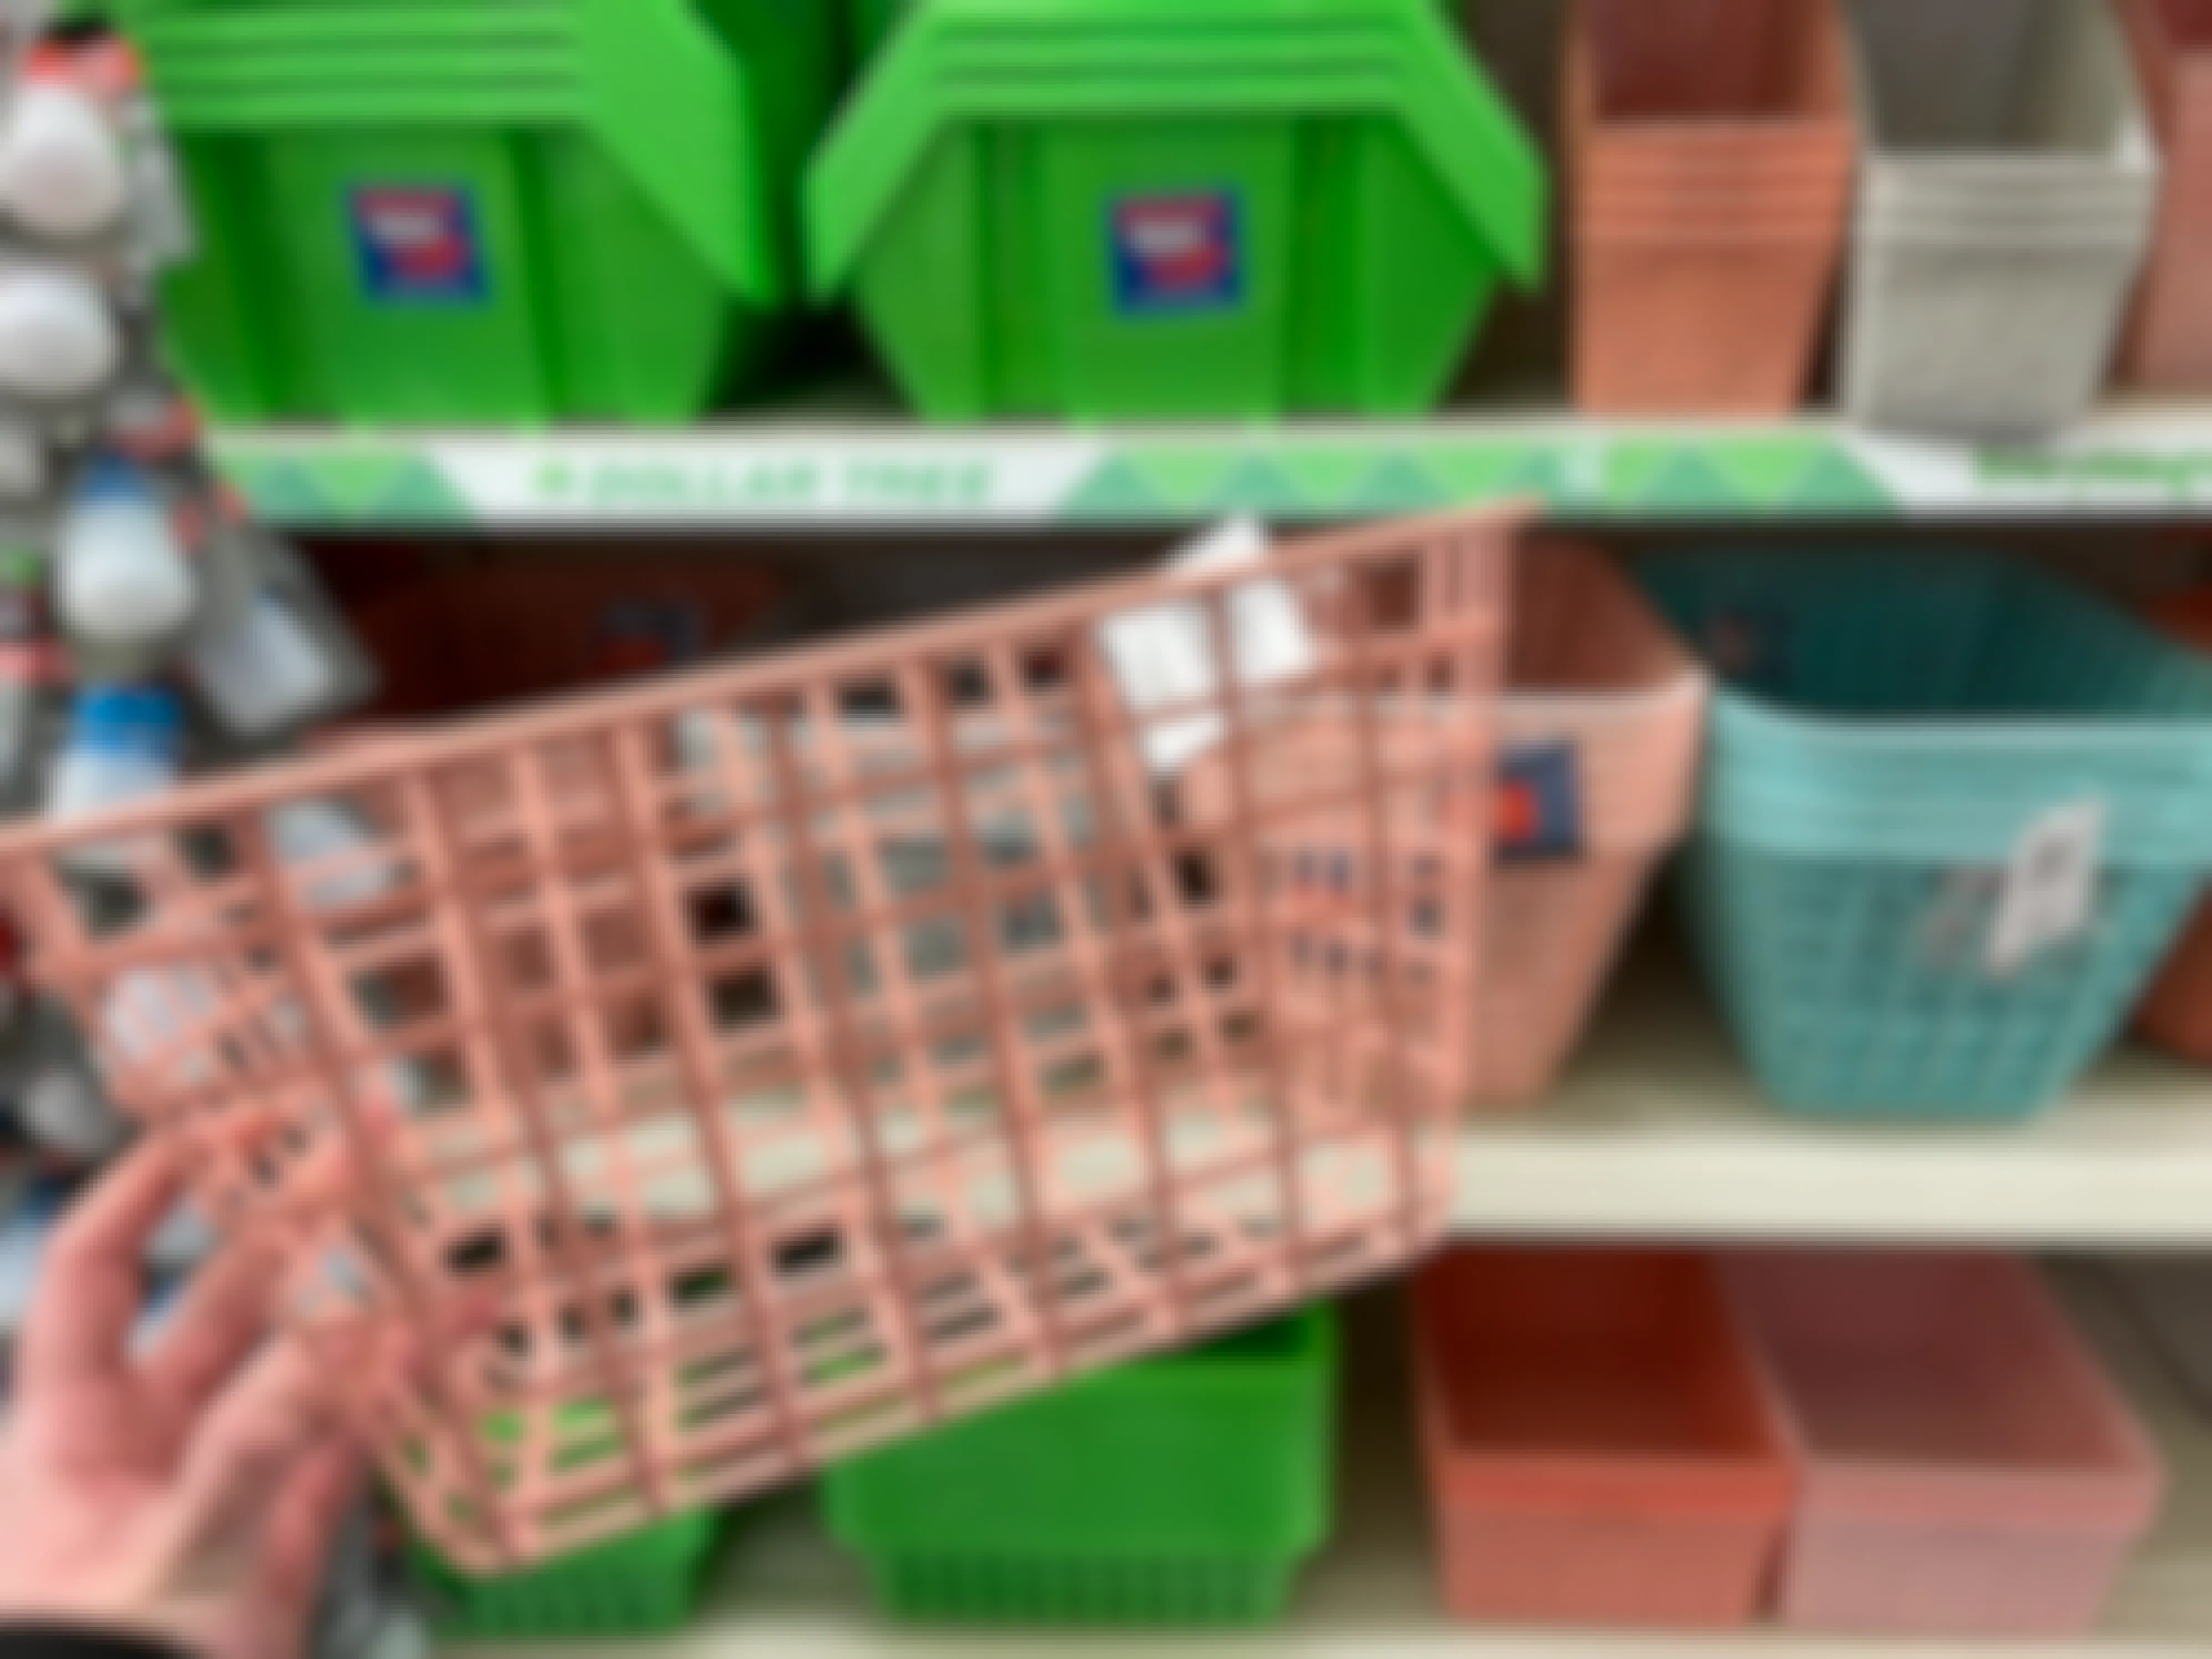 A person holding a pink storage basket in front of a dollar store shelf filled with other storage baskets.